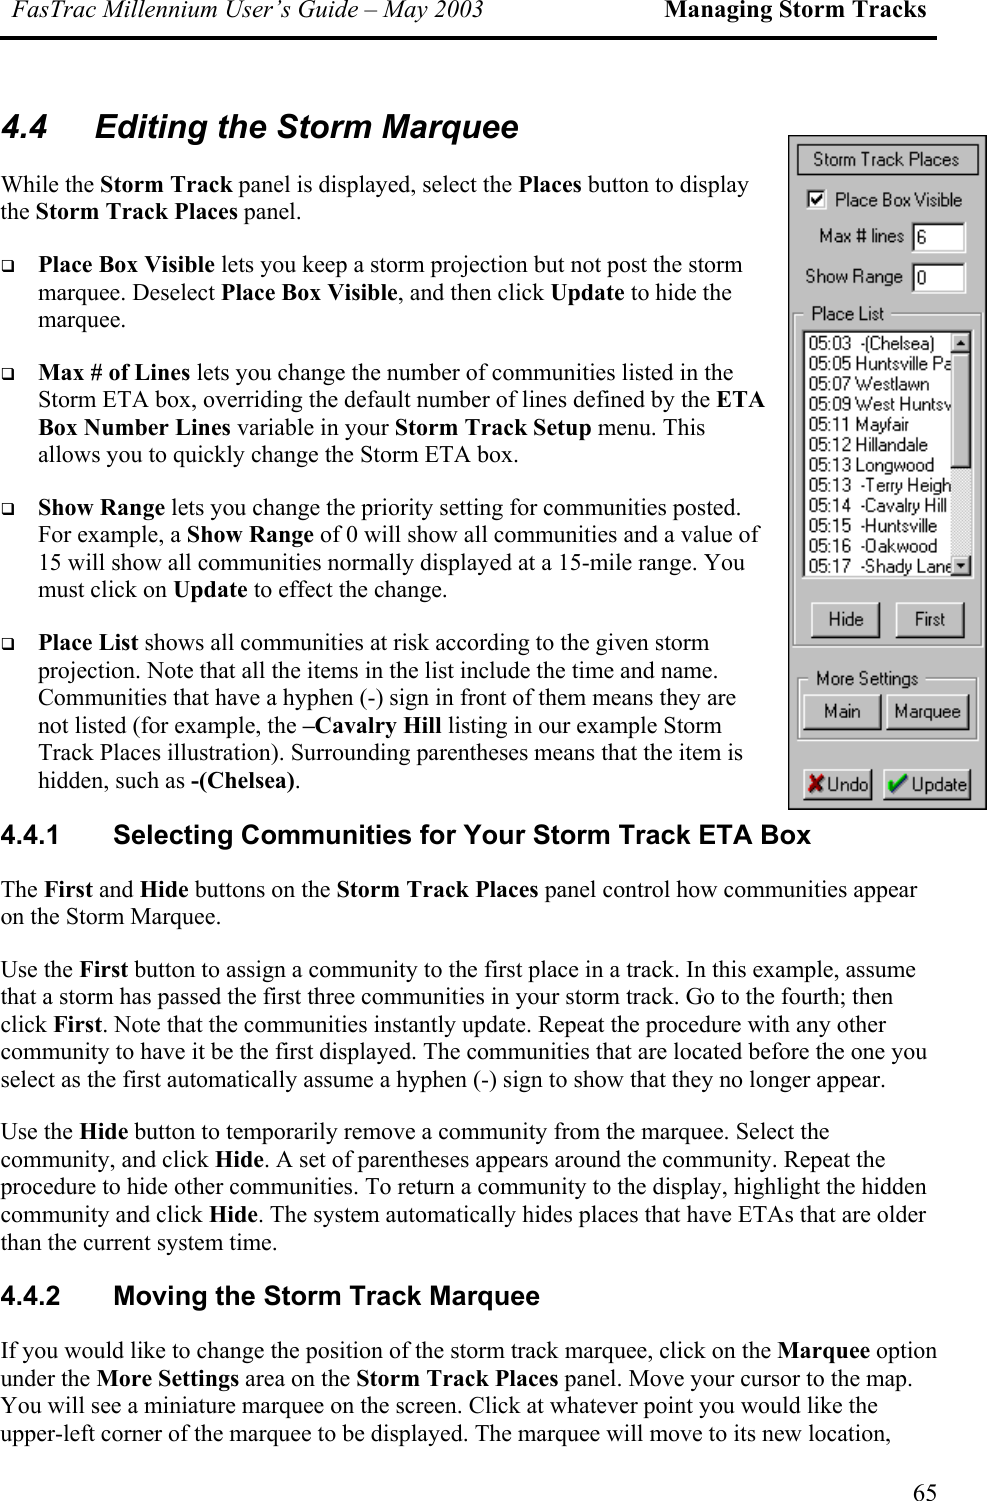 FasTrac Millennium User’s Guide – May 2003 Managing Storm Tracks 4.4  Editing the Storm Marquee While the Storm Track panel is displayed, select the Places button to display the Storm Track Places panel.   Place Box Visible lets you keep a storm projection but not post the storm marquee. Deselect Place Box Visible, and then click Update to hide the marquee.   Max # of Lines lets you change the number of communities listed in the Storm ETA box, overriding the default number of lines defined by the ETA Box Number Lines variable in your Storm Track Setup menu. This allows you to quickly change the Storm ETA box.   Show Range lets you change the priority setting for communities posted. For example, a Show Range of 0 will show all communities and a value of 15 will show all communities normally displayed at a 15-mile range. You must click on Update to effect the change.   Place List shows all communities at risk according to the given storm projection. Note that all the items in the list include the time and name. Communities that have a hyphen (-) sign in front of them means they are not listed (for example, the –Cavalry Hill listing in our example Storm Track Places illustration). Surrounding parentheses means that the item is hidden, such as -(Chelsea). 4.4.1 Selecting Communities for Your Storm Track ETA Box The First and Hide buttons on the Storm Track Places panel control how communities appear on the Storm Marquee. Use the First button to assign a community to the first place in a track. In this example, assume that a storm has passed the first three communities in your storm track. Go to the fourth; then click First. Note that the communities instantly update. Repeat the procedure with any other community to have it be the first displayed. The communities that are located before the one you select as the first automatically assume a hyphen (-) sign to show that they no longer appear. Use the Hide button to temporarily remove a community from the marquee. Select the community, and click Hide. A set of parentheses appears around the community. Repeat the procedure to hide other communities. To return a community to the display, highlight the hidden community and click Hide. The system automatically hides places that have ETAs that are older than the current system time. 4.4.2  Moving the Storm Track Marquee If you would like to change the position of the storm track marquee, click on the Marquee option under the More Settings area on the Storm Track Places panel. Move your cursor to the map. You will see a miniature marquee on the screen. Click at whatever point you would like the upper-left corner of the marquee to be displayed. The marquee will move to its new location, 65 